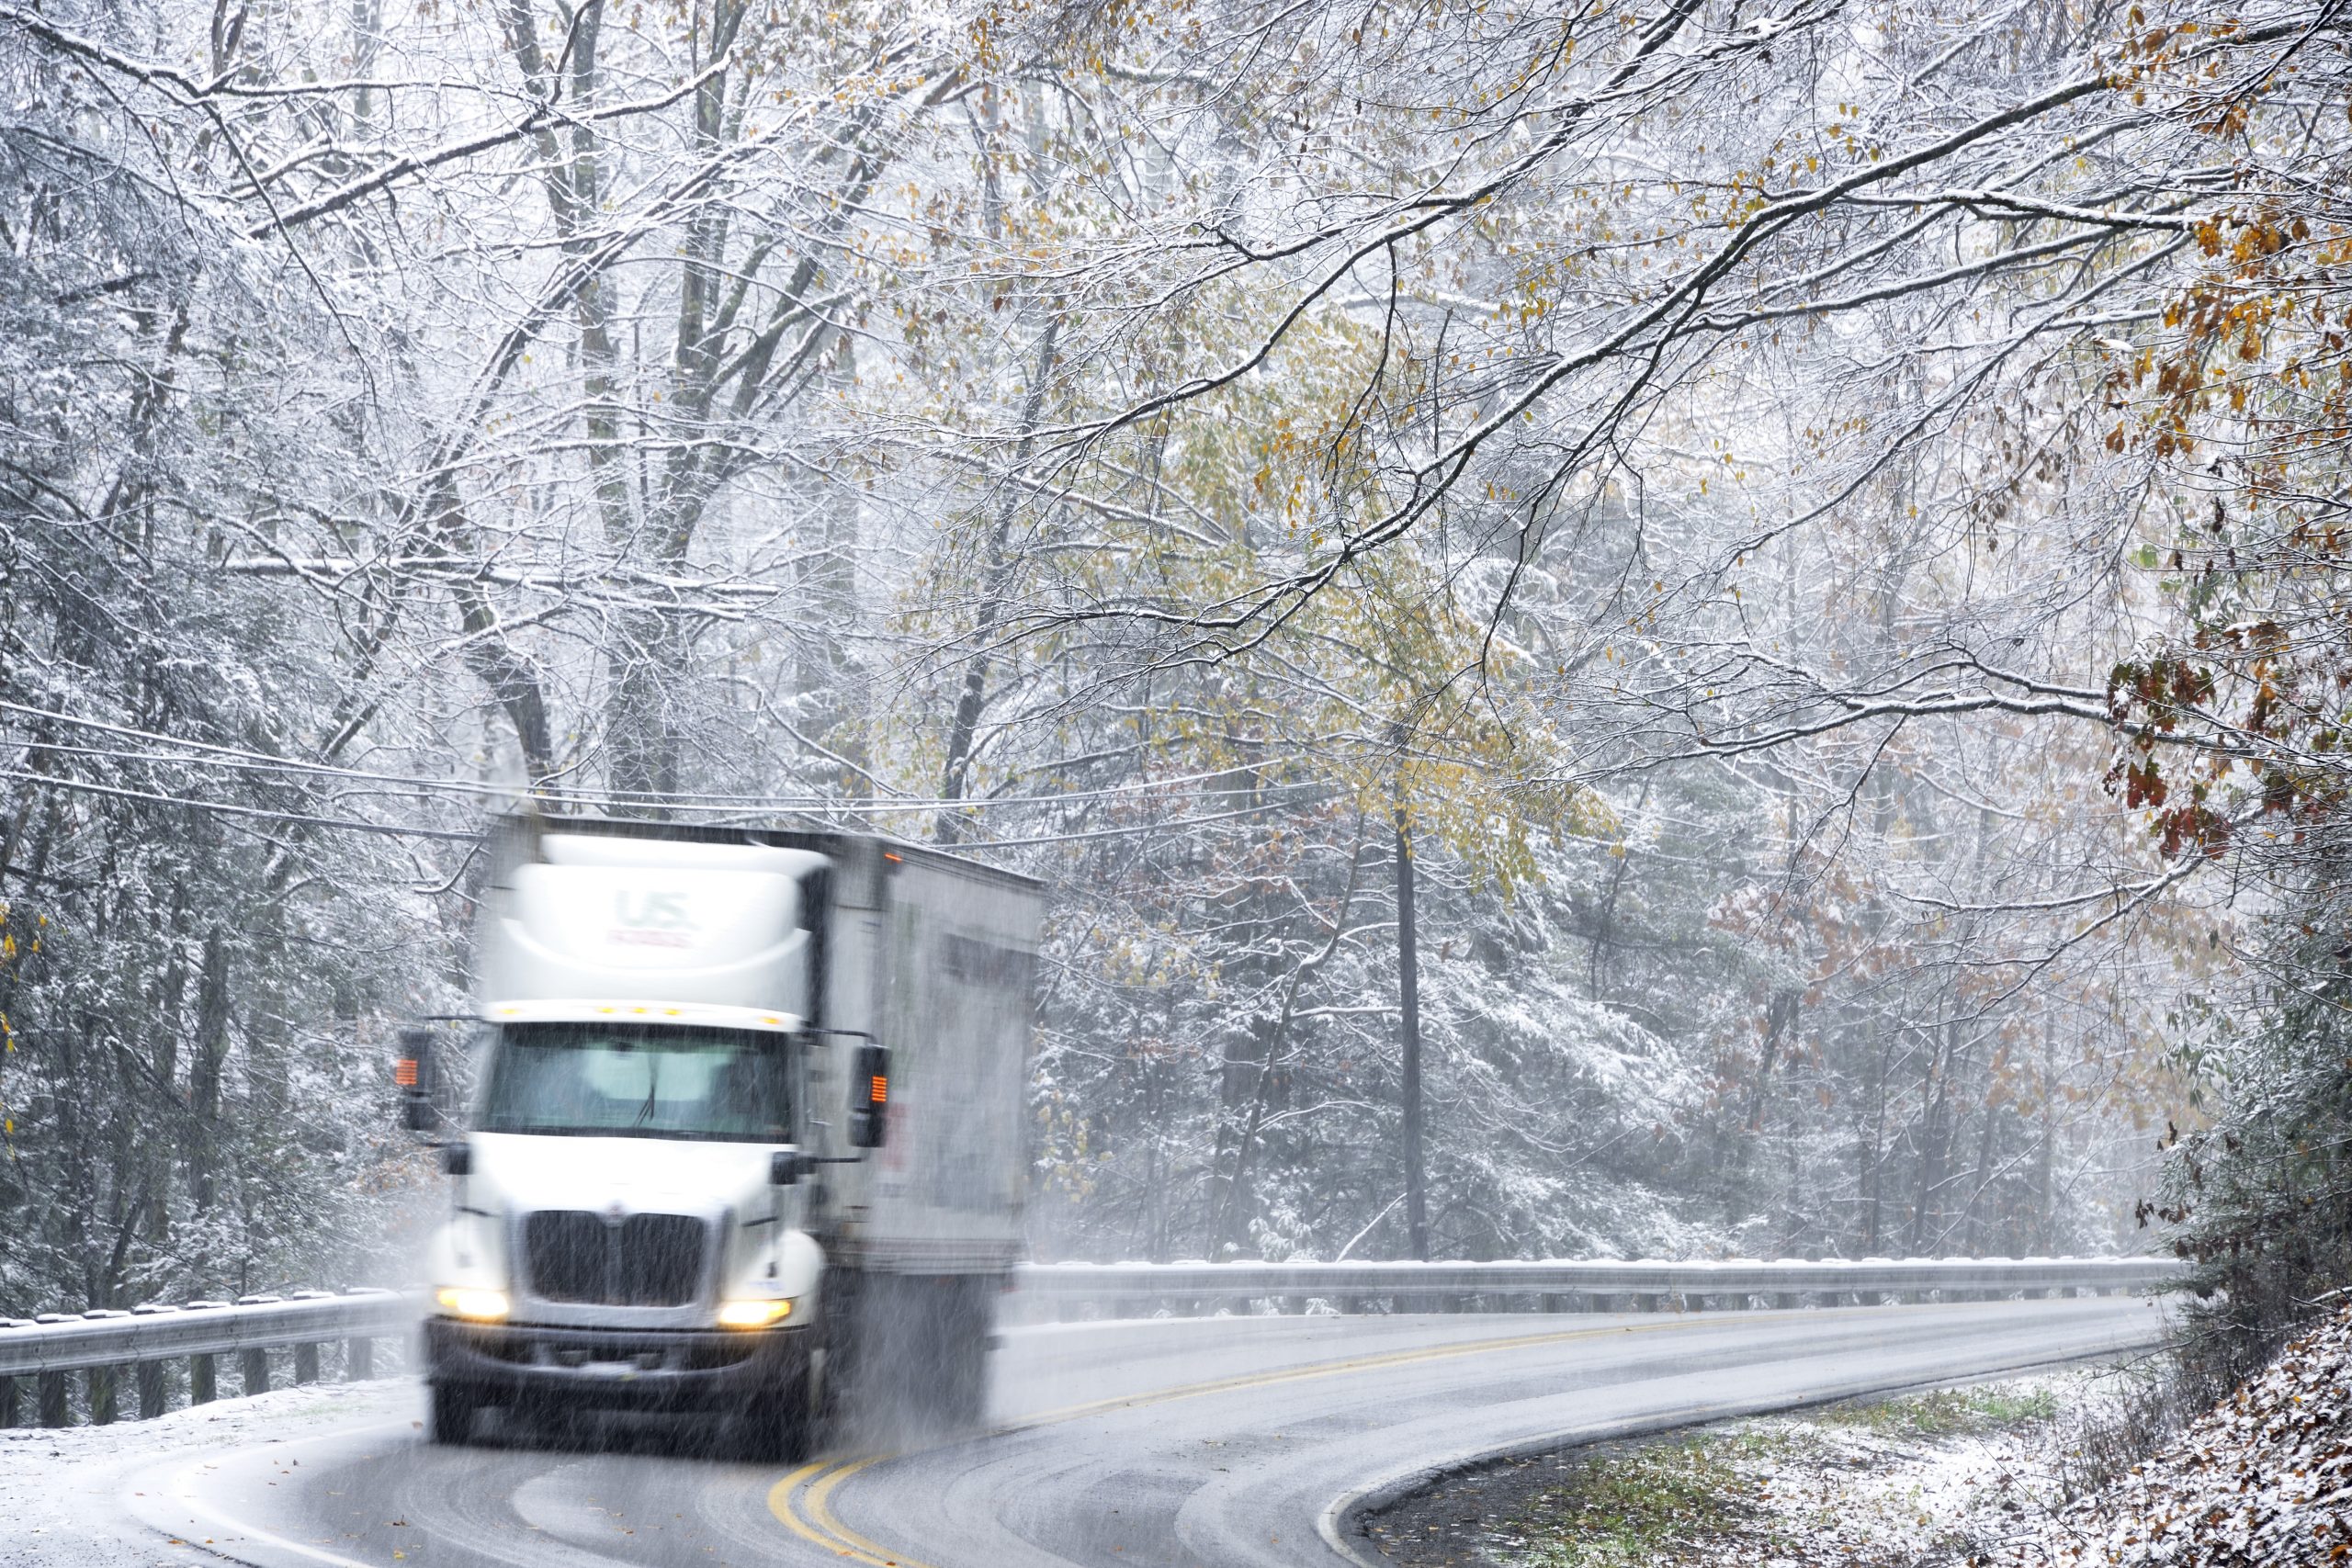 Must-Have Truck Driver Gear for Winter Weather - PAM Driving Jobs